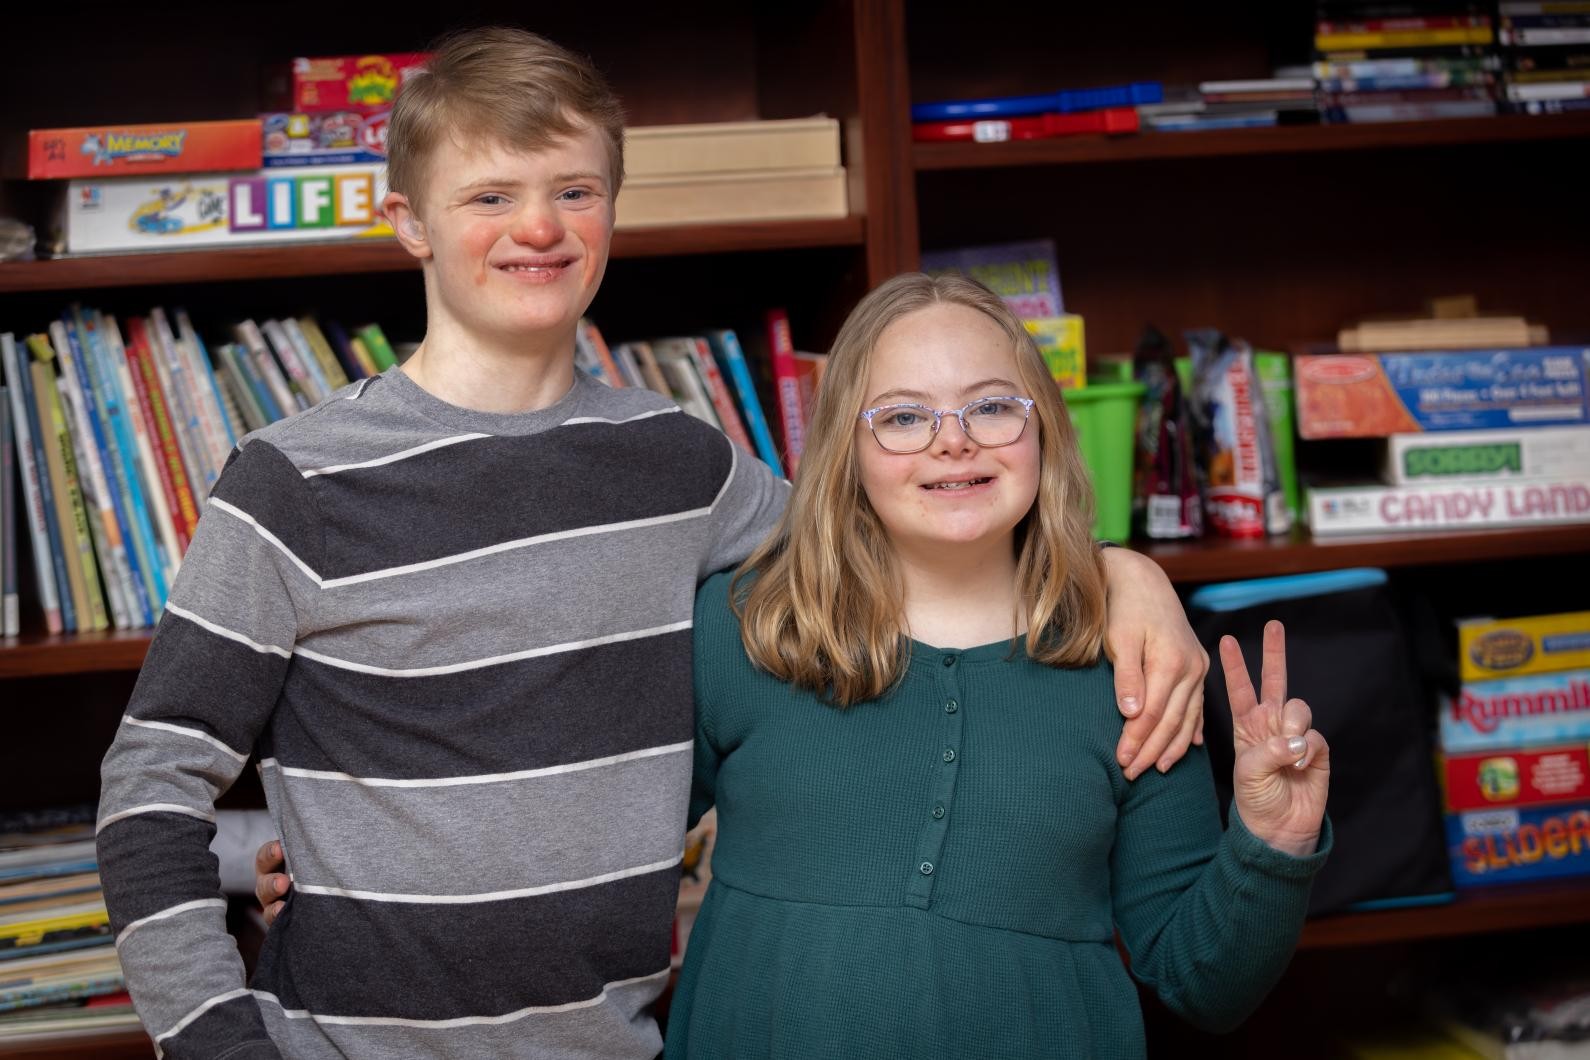 A boy and girl pose for a picture with their arms around each other.